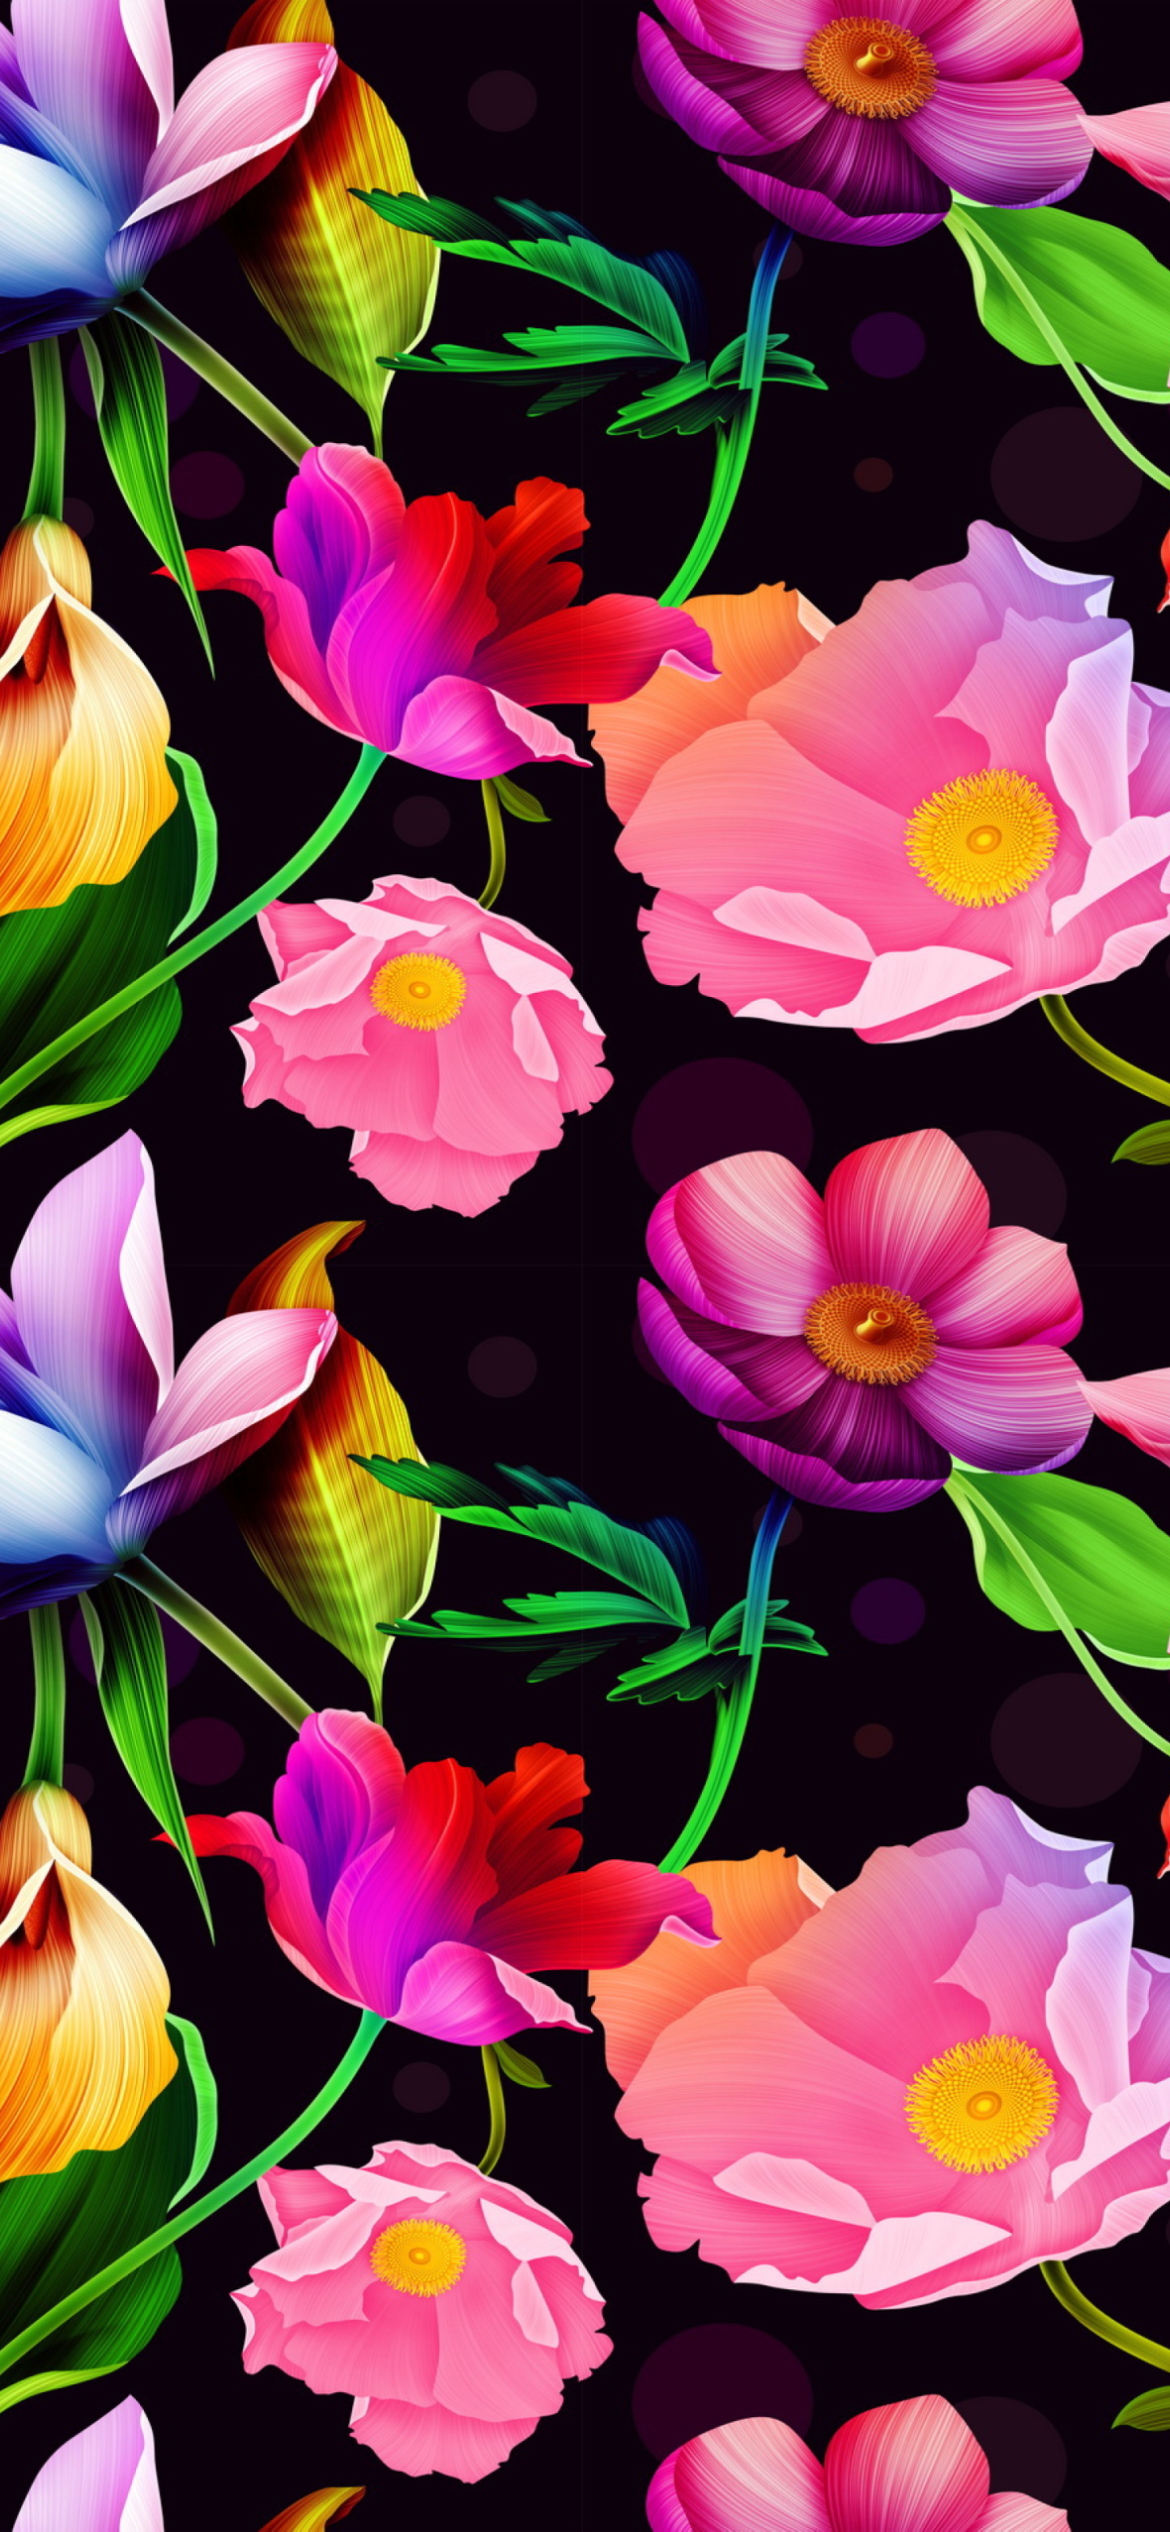 Colorful Flowers wallpaper 1170x2532